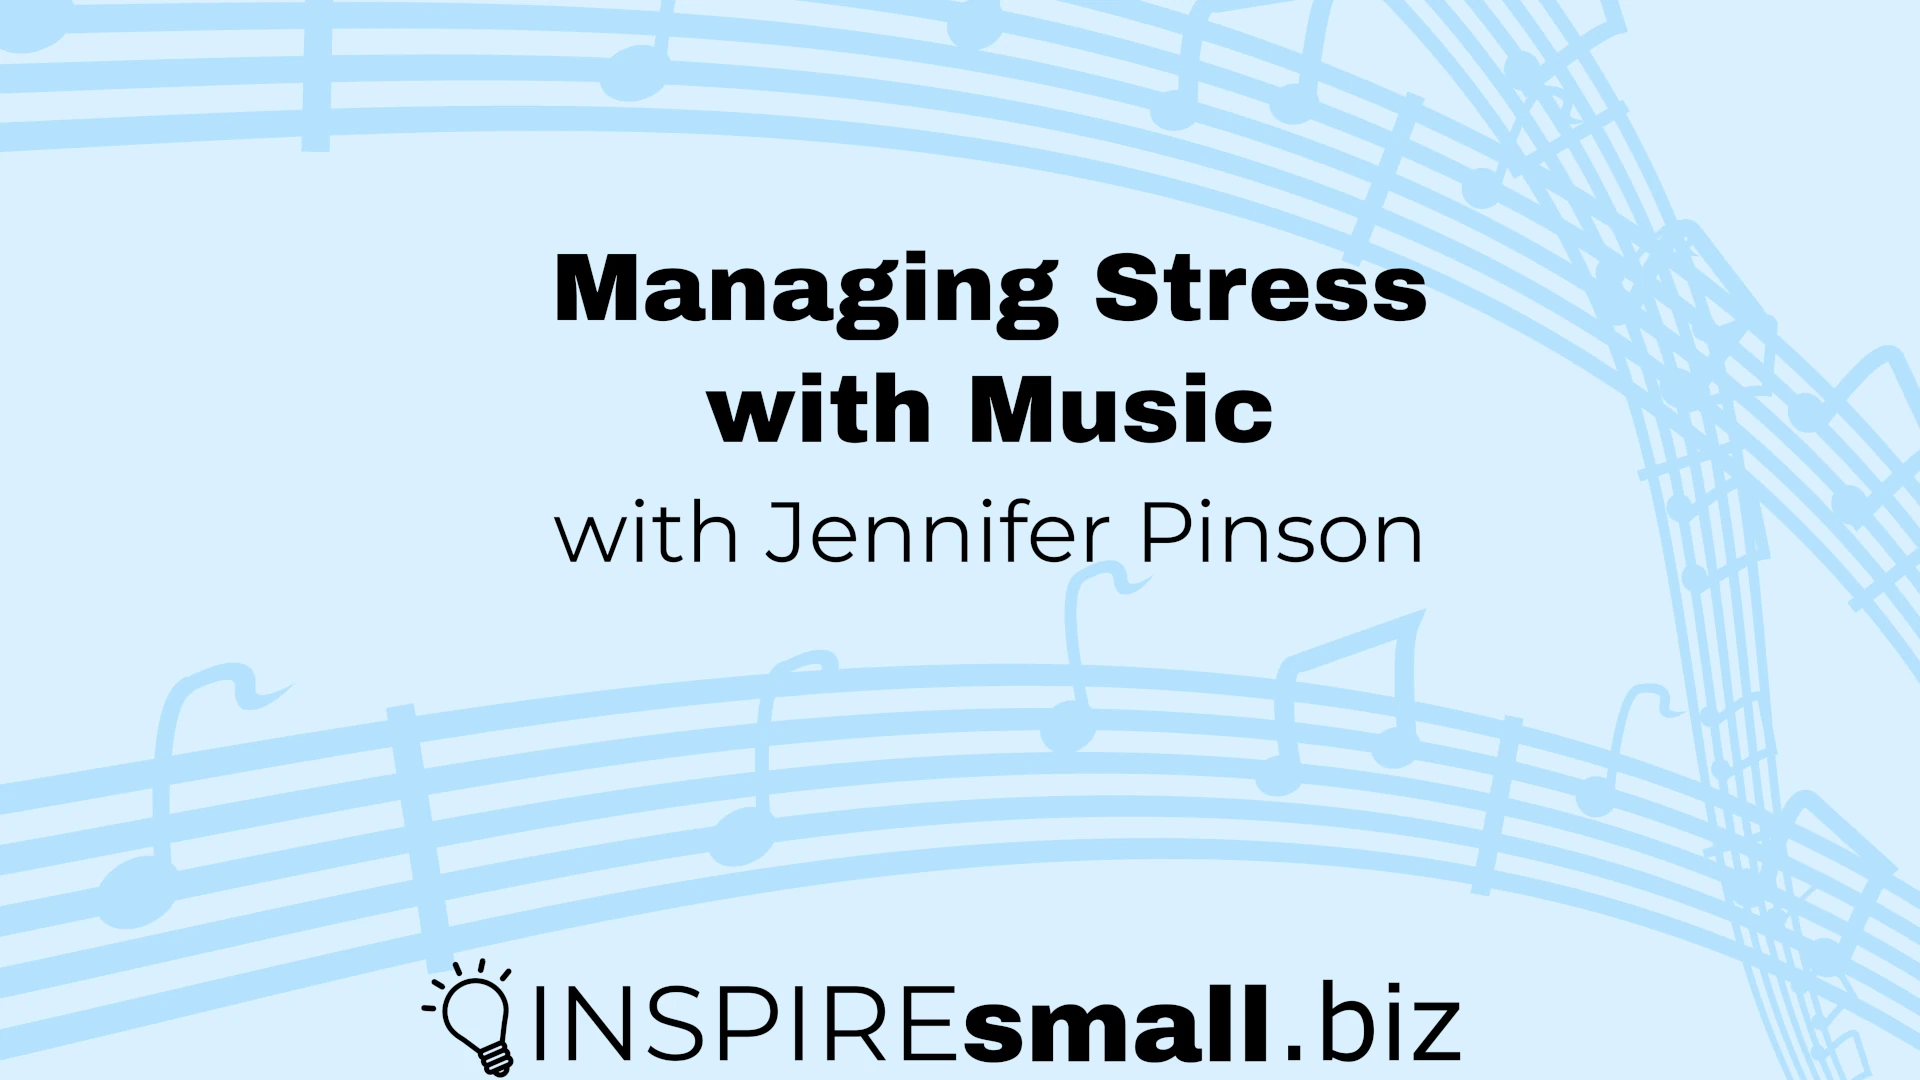 Managing Stress with Music with Jennifer Pinson, hosted by INSPIREsmall.biz on light blue background with music staffs running across the image